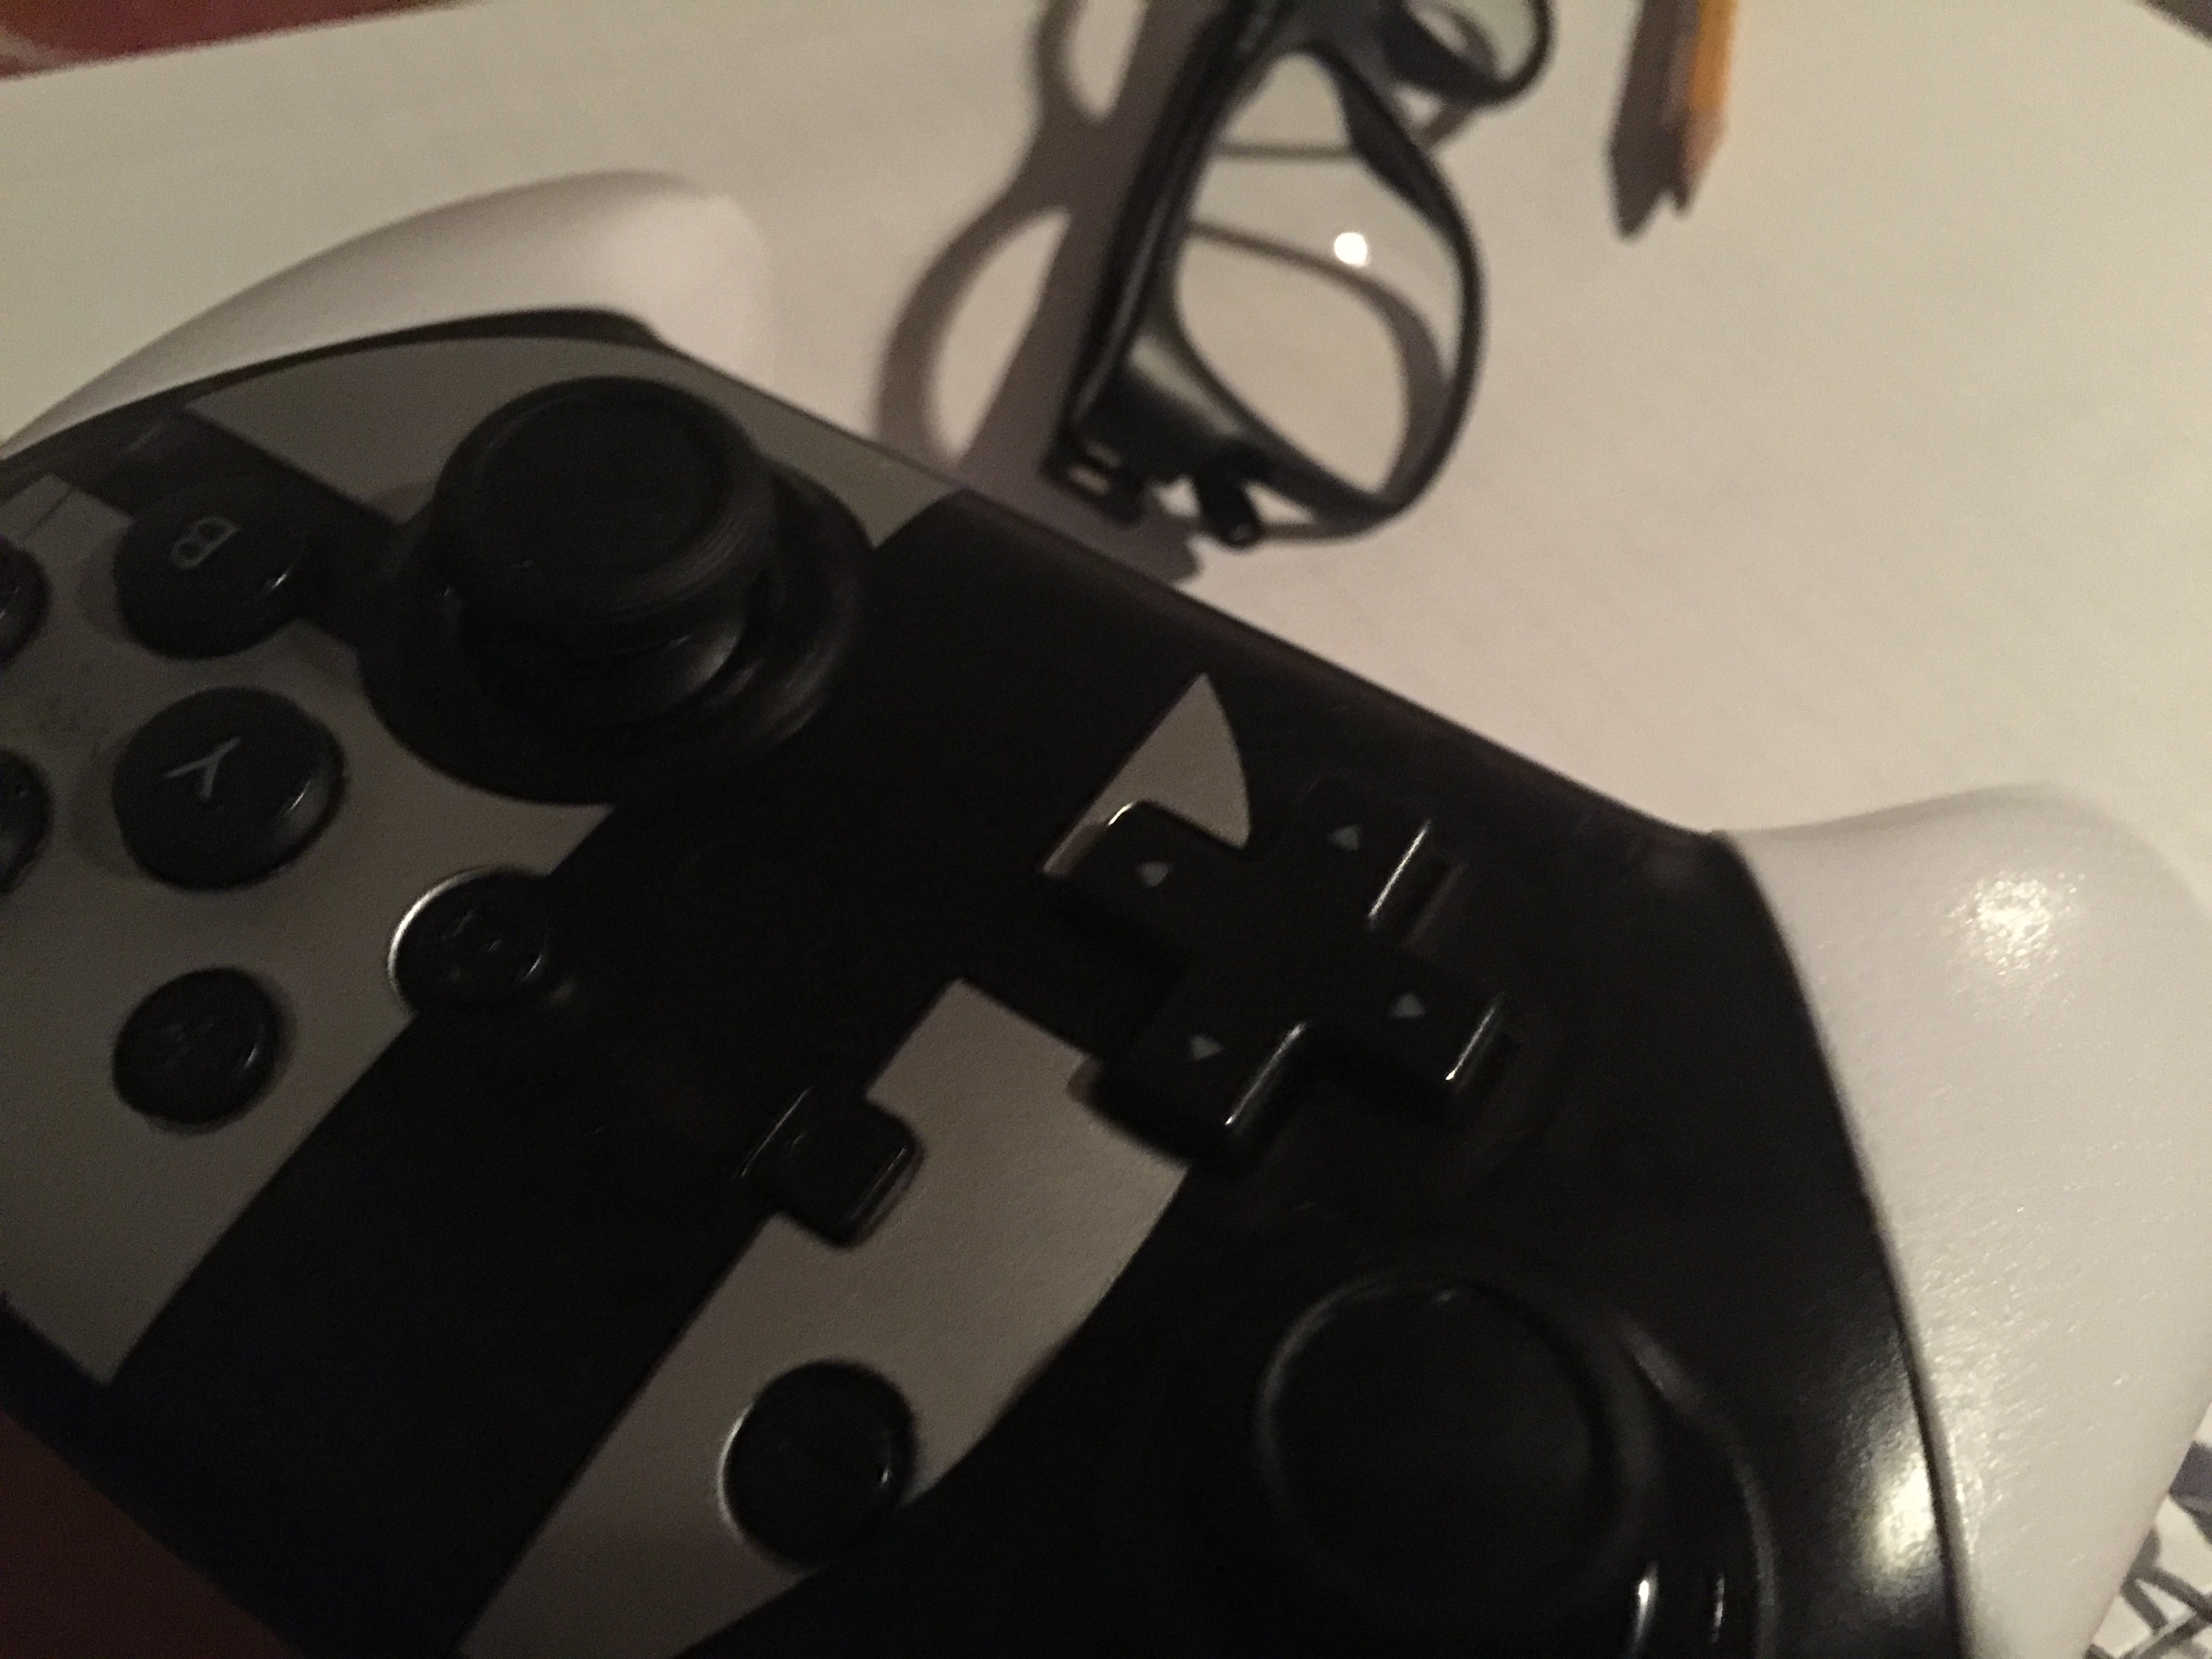 An image with a game controller, glasses, and a pencil on top of a notebook.